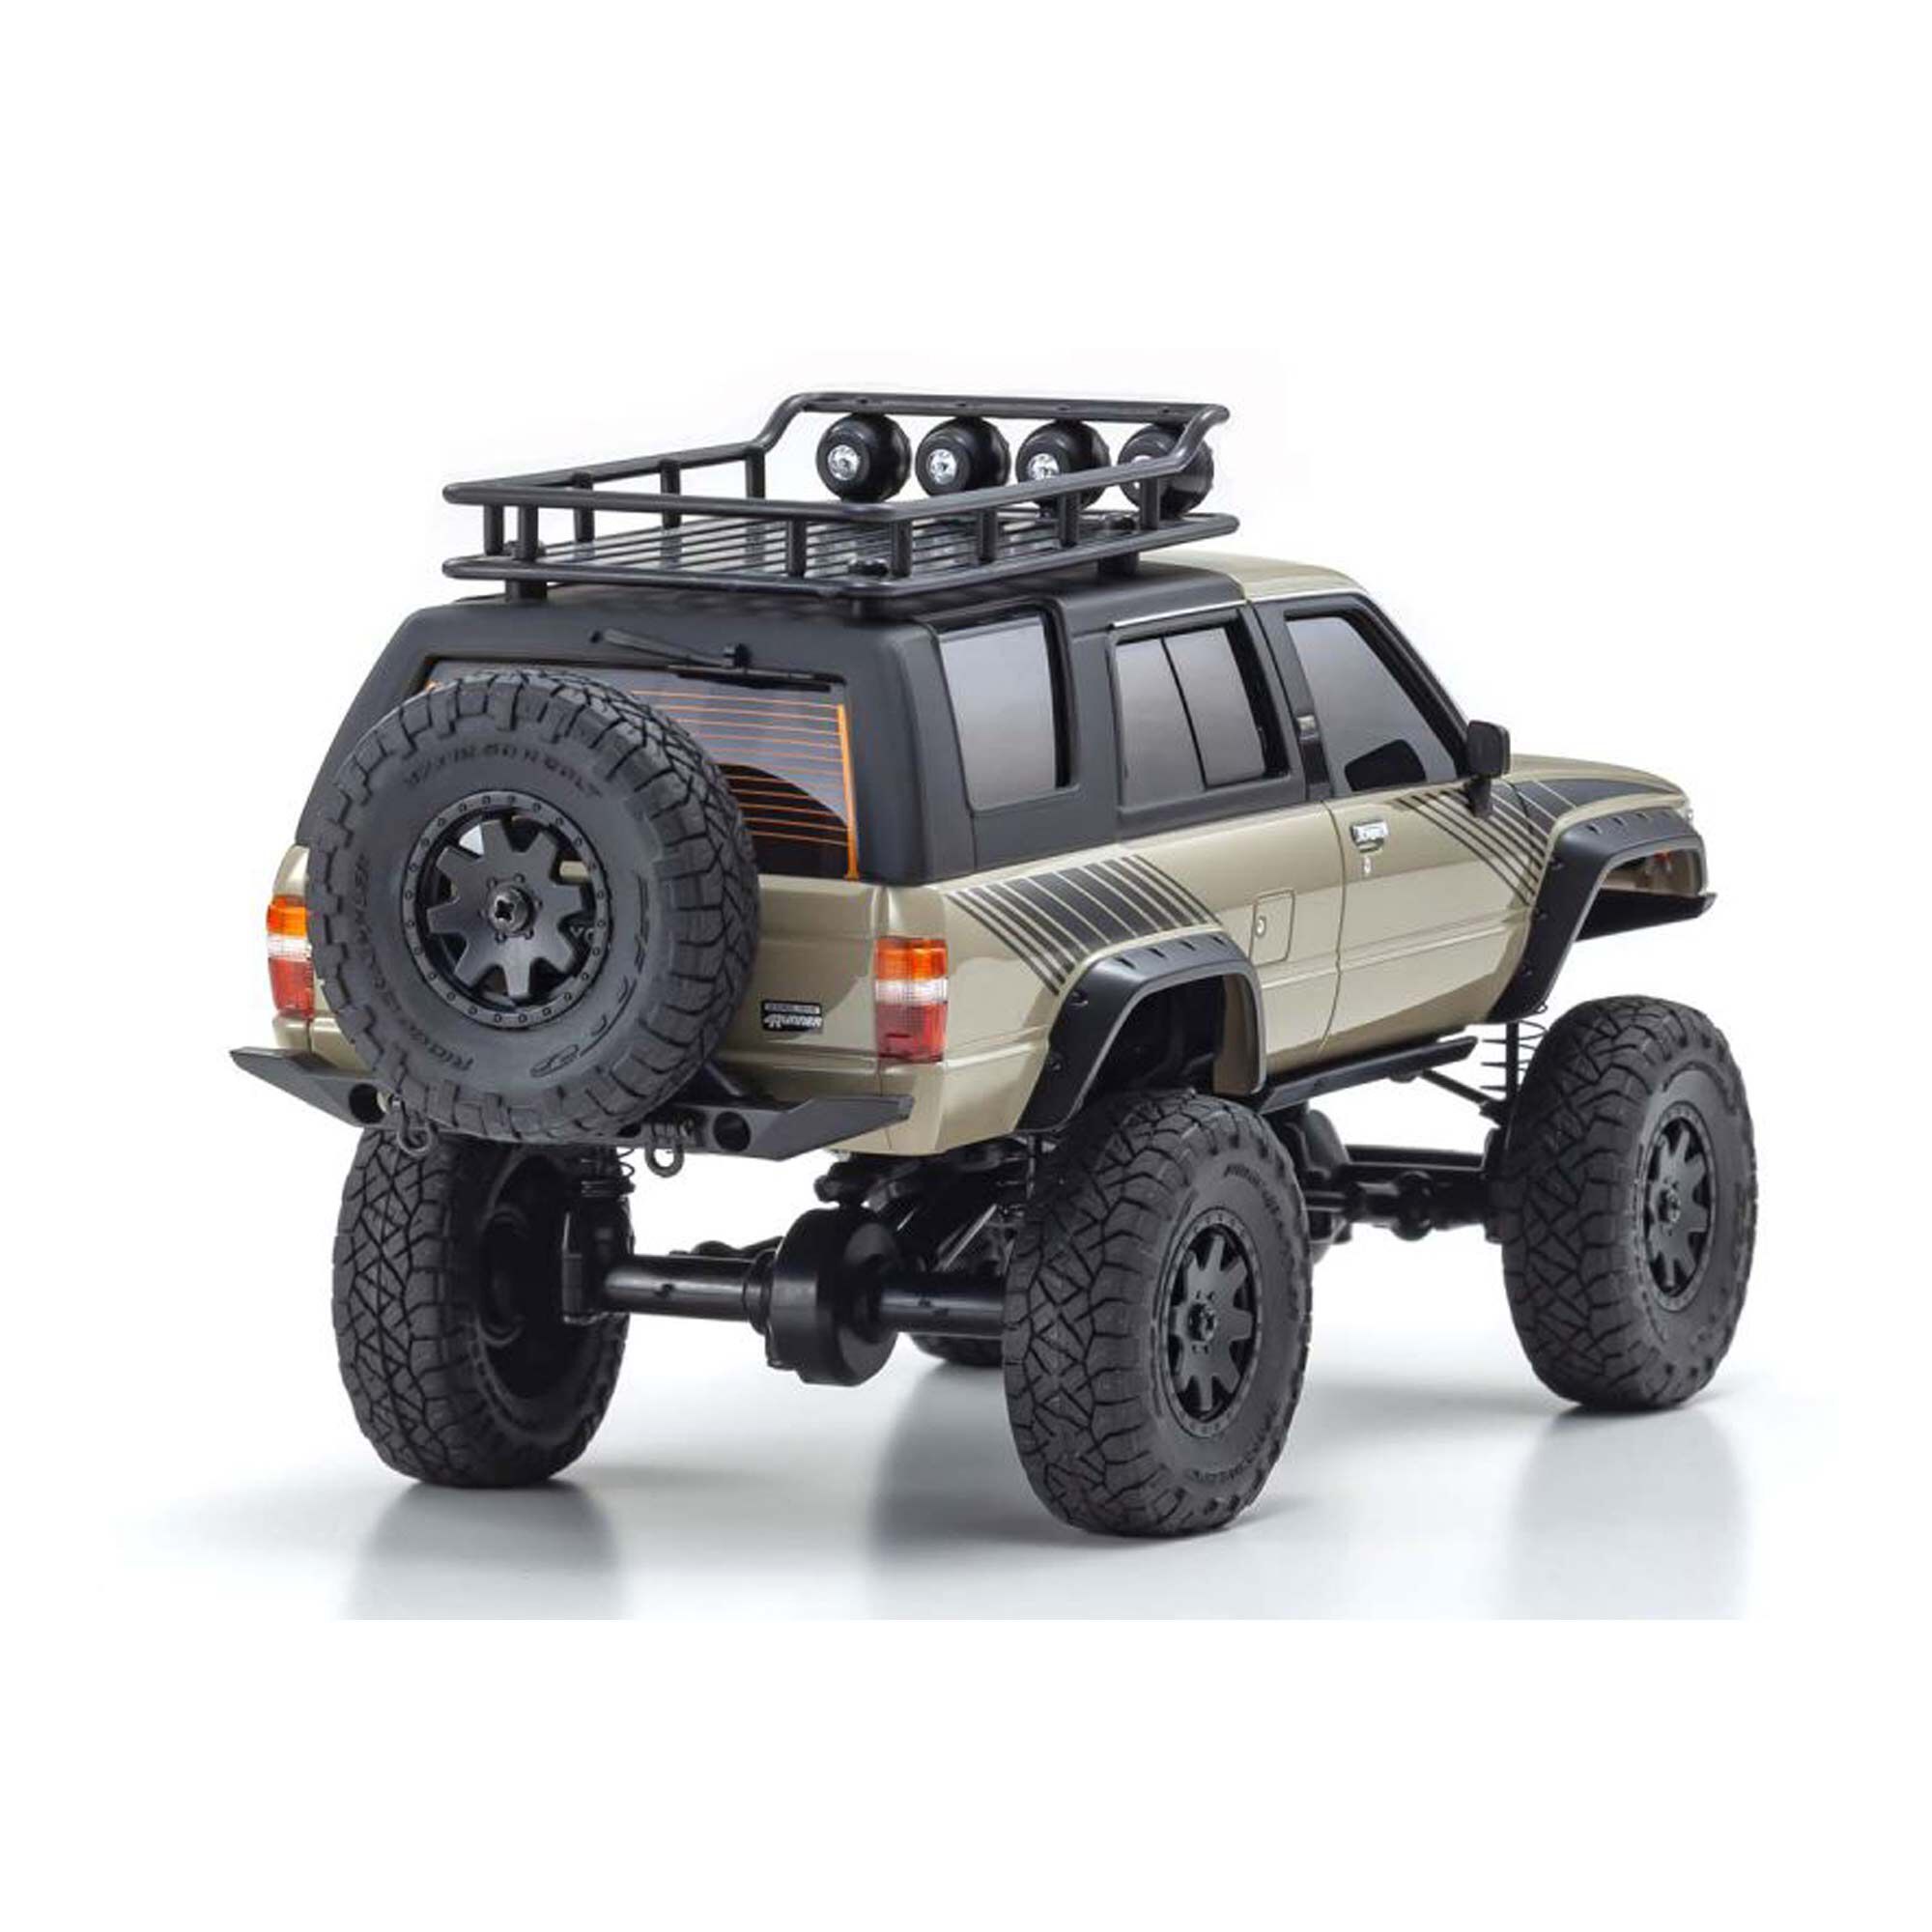 Body Lift Kits for Kyosho Mini-z 4x4 Toyota 4-Runner and Jeep Rubicon